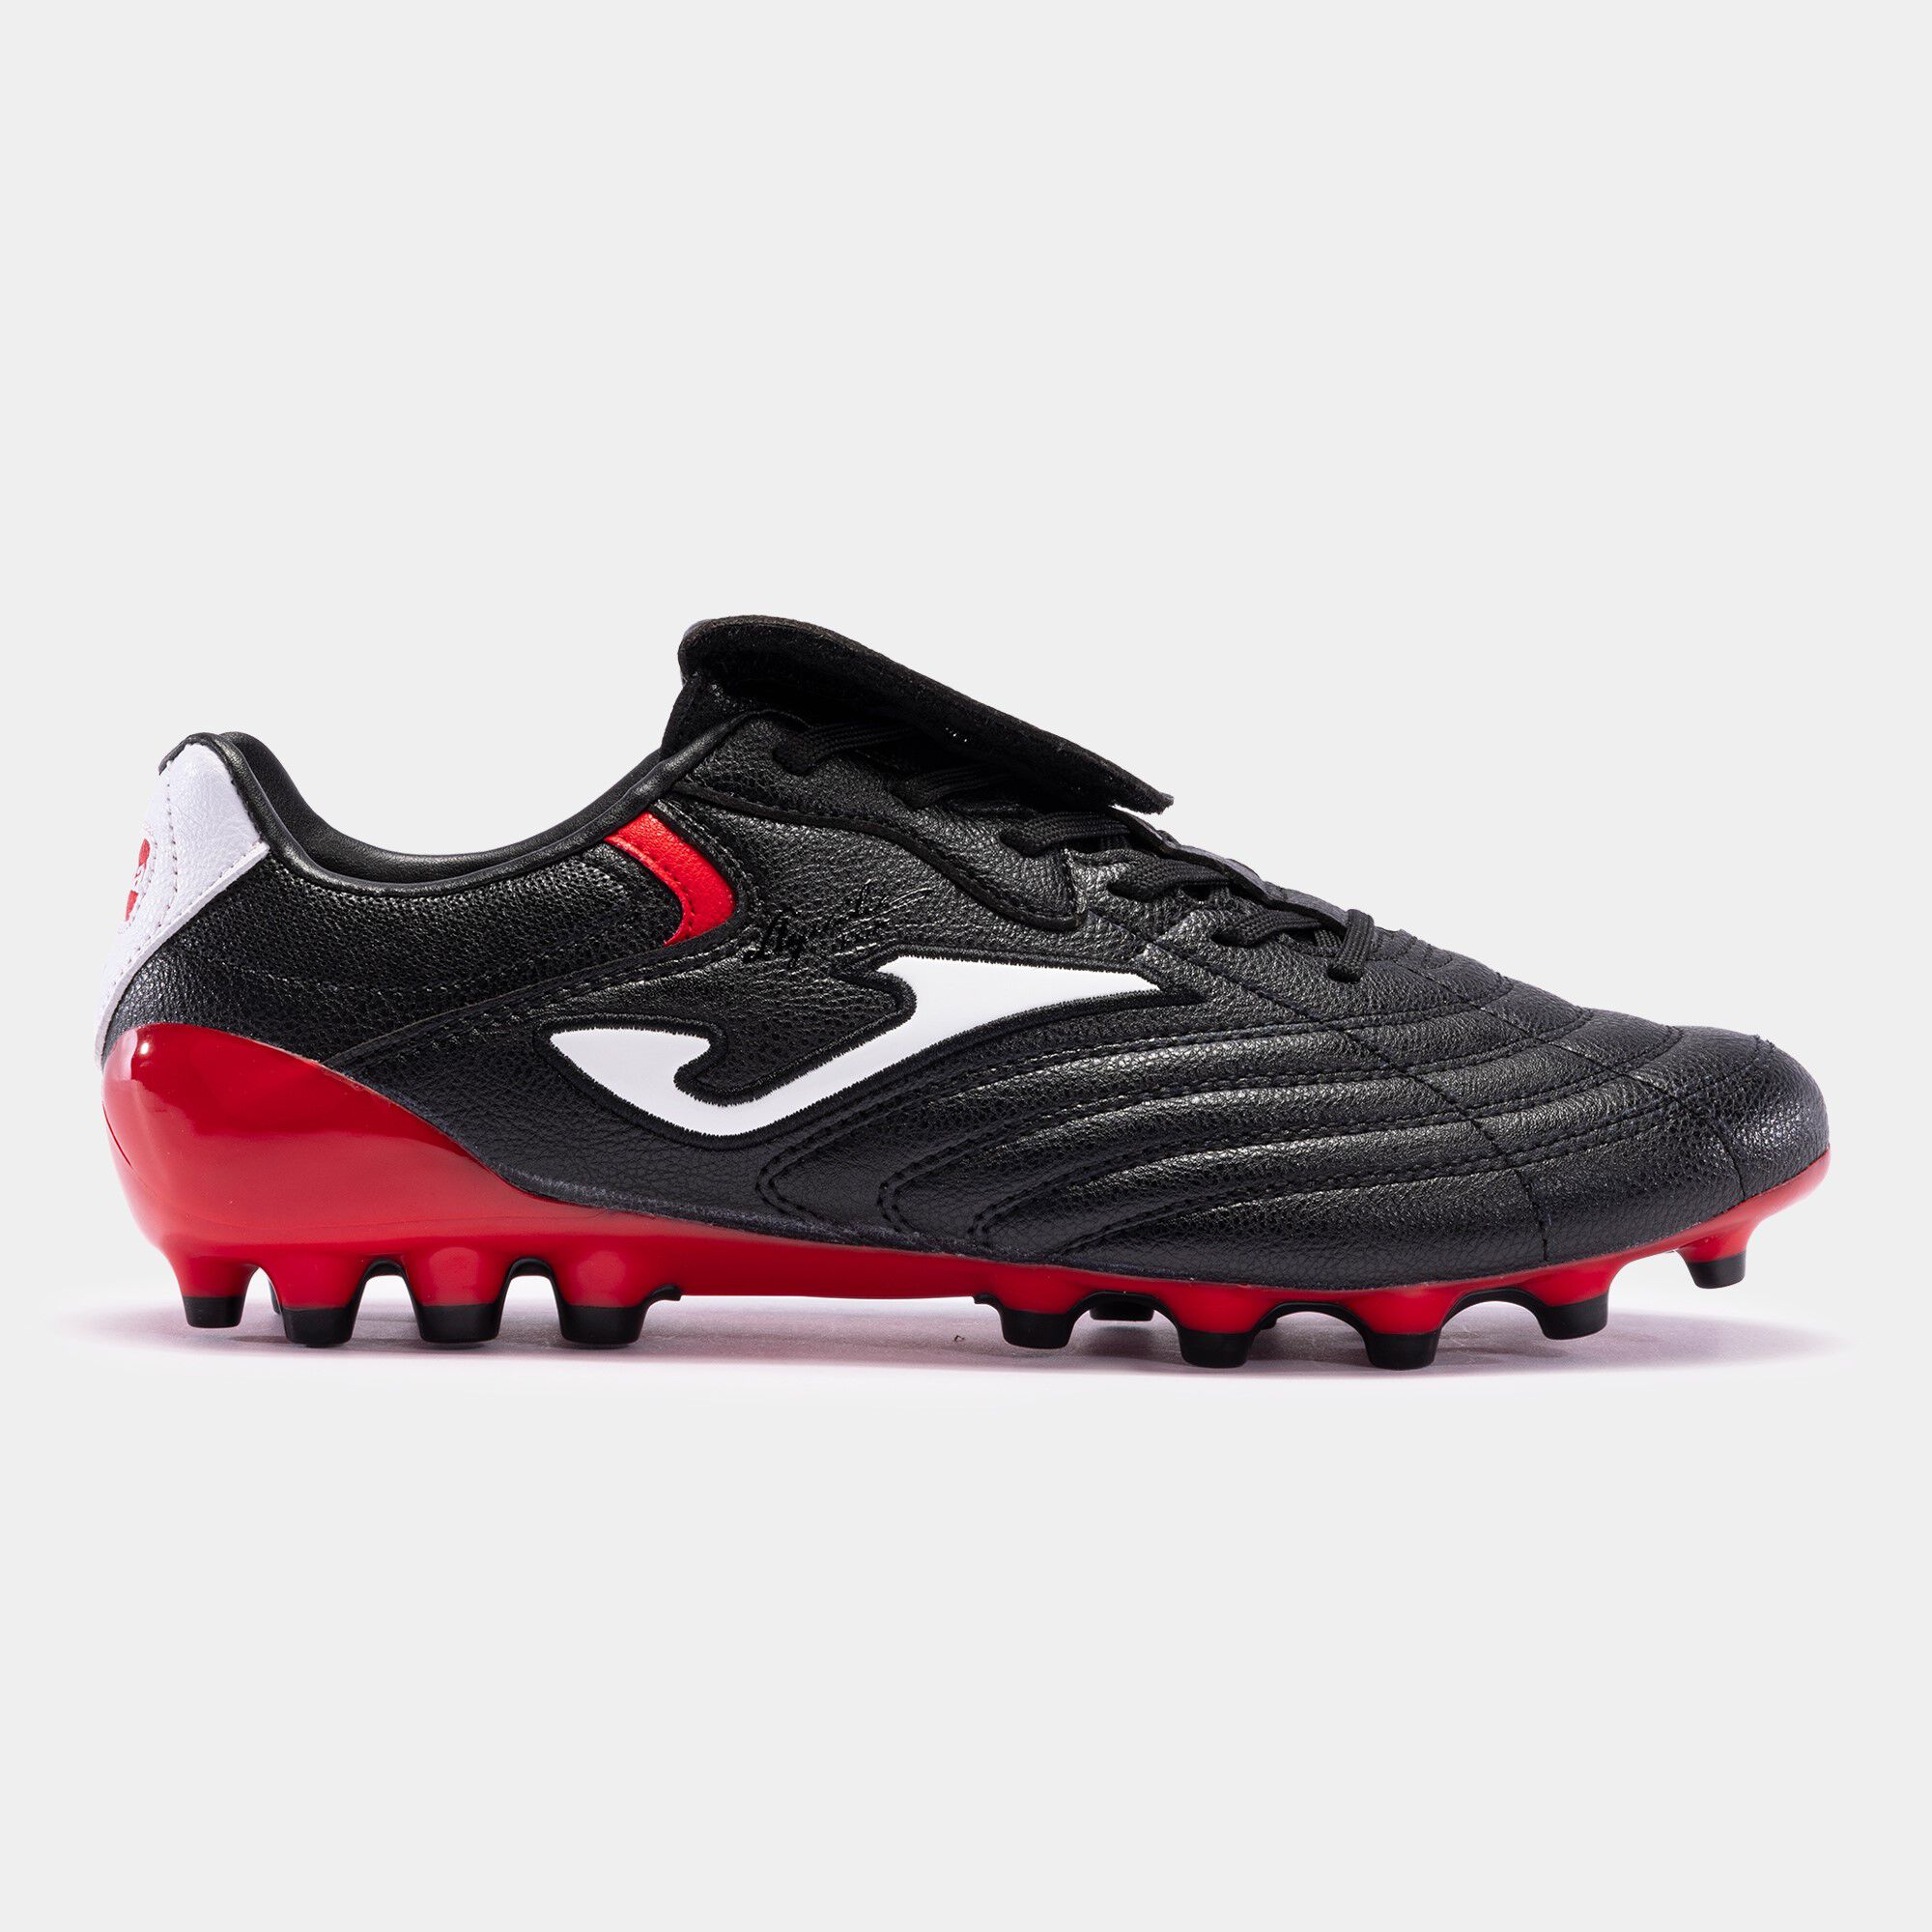 Football boots Cup 23 artificial grass black red |